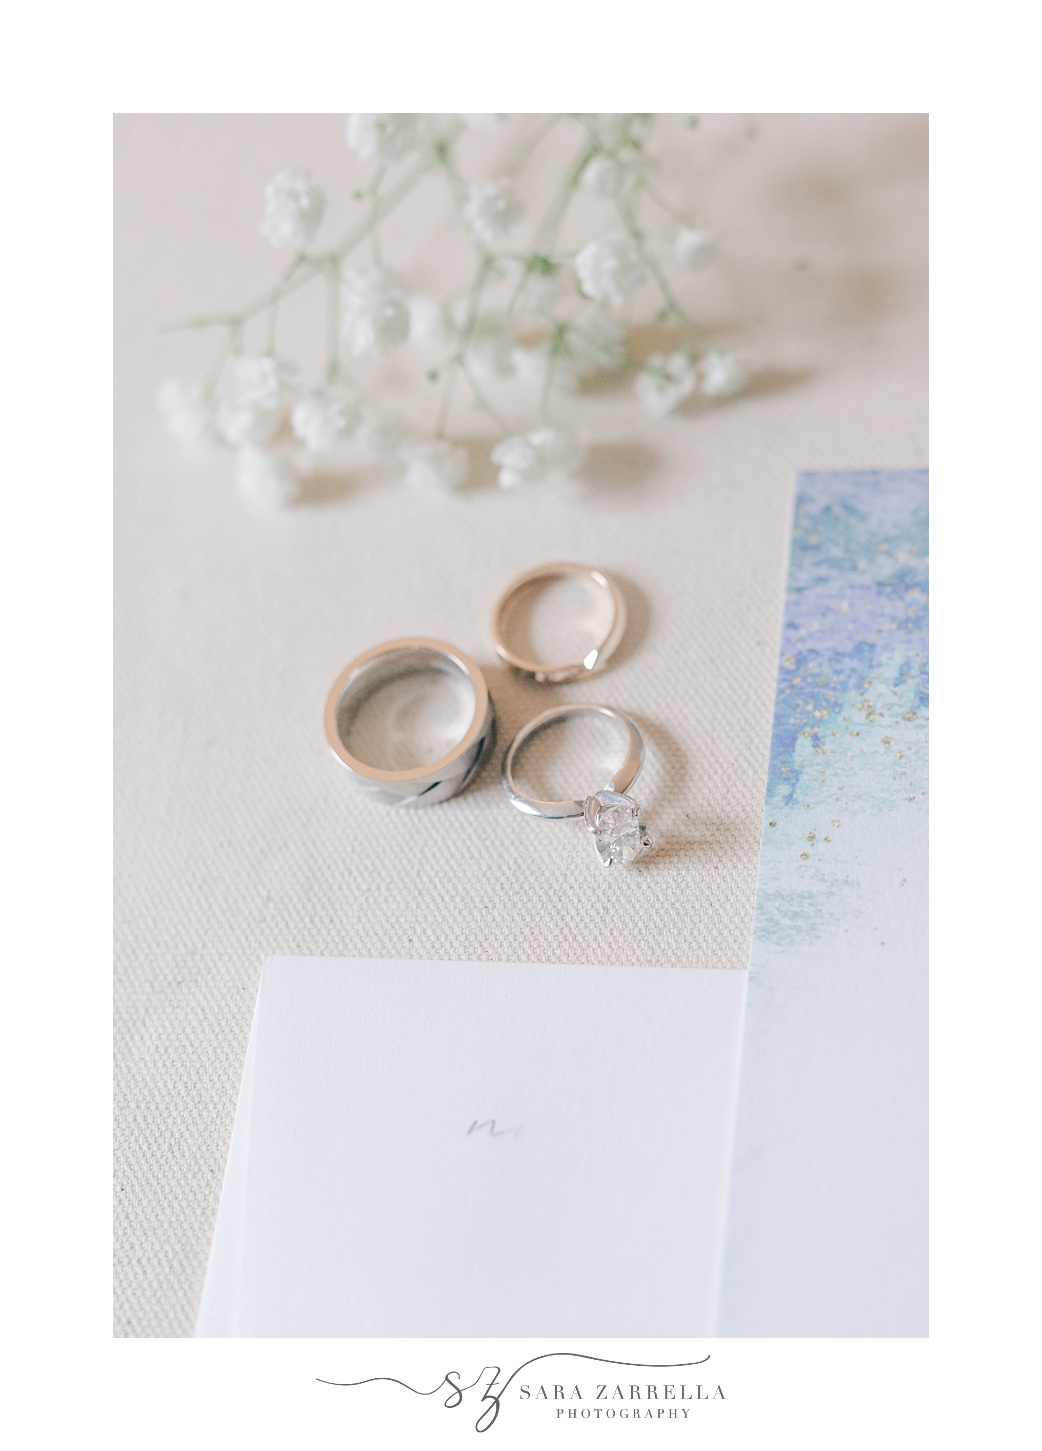 wedding rings near blue and white stationery set for summer OceanCliff Hotel wedding